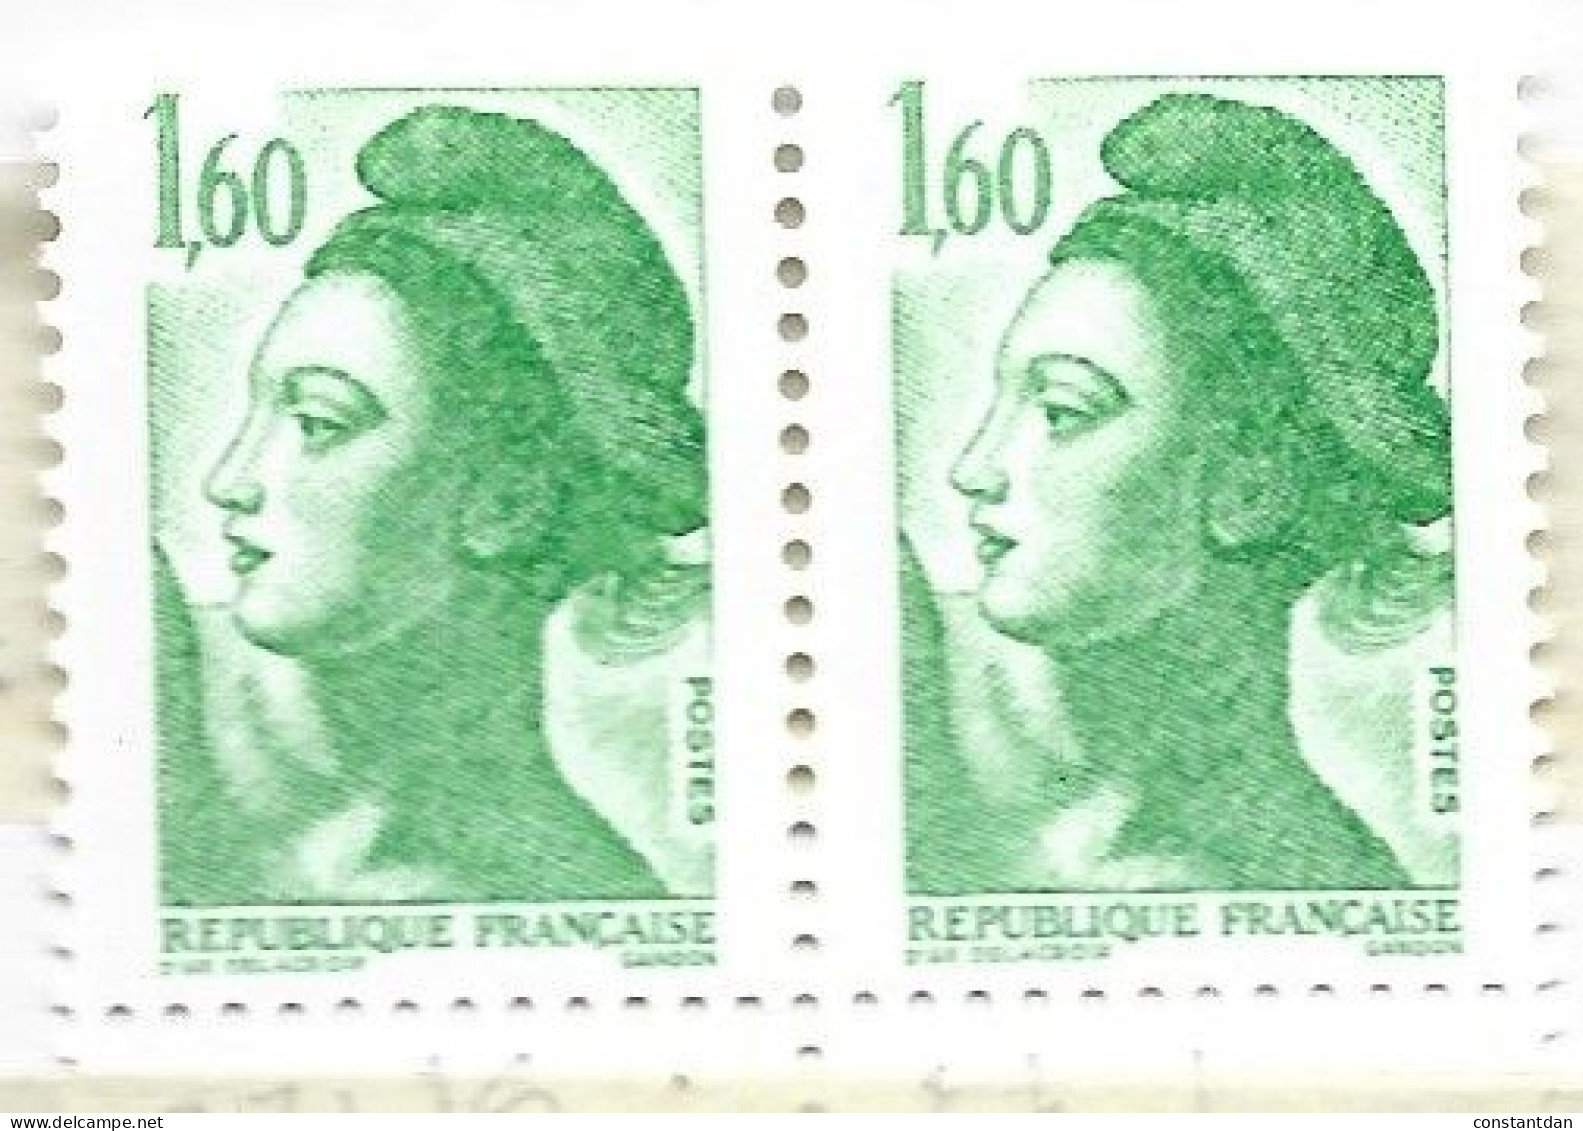 FRANCE N°2319 1.60 VERT TYPE LIBERTE 2 1/2 BARRES PAIRE NEUF SANS CHARNIERE - Unused Stamps